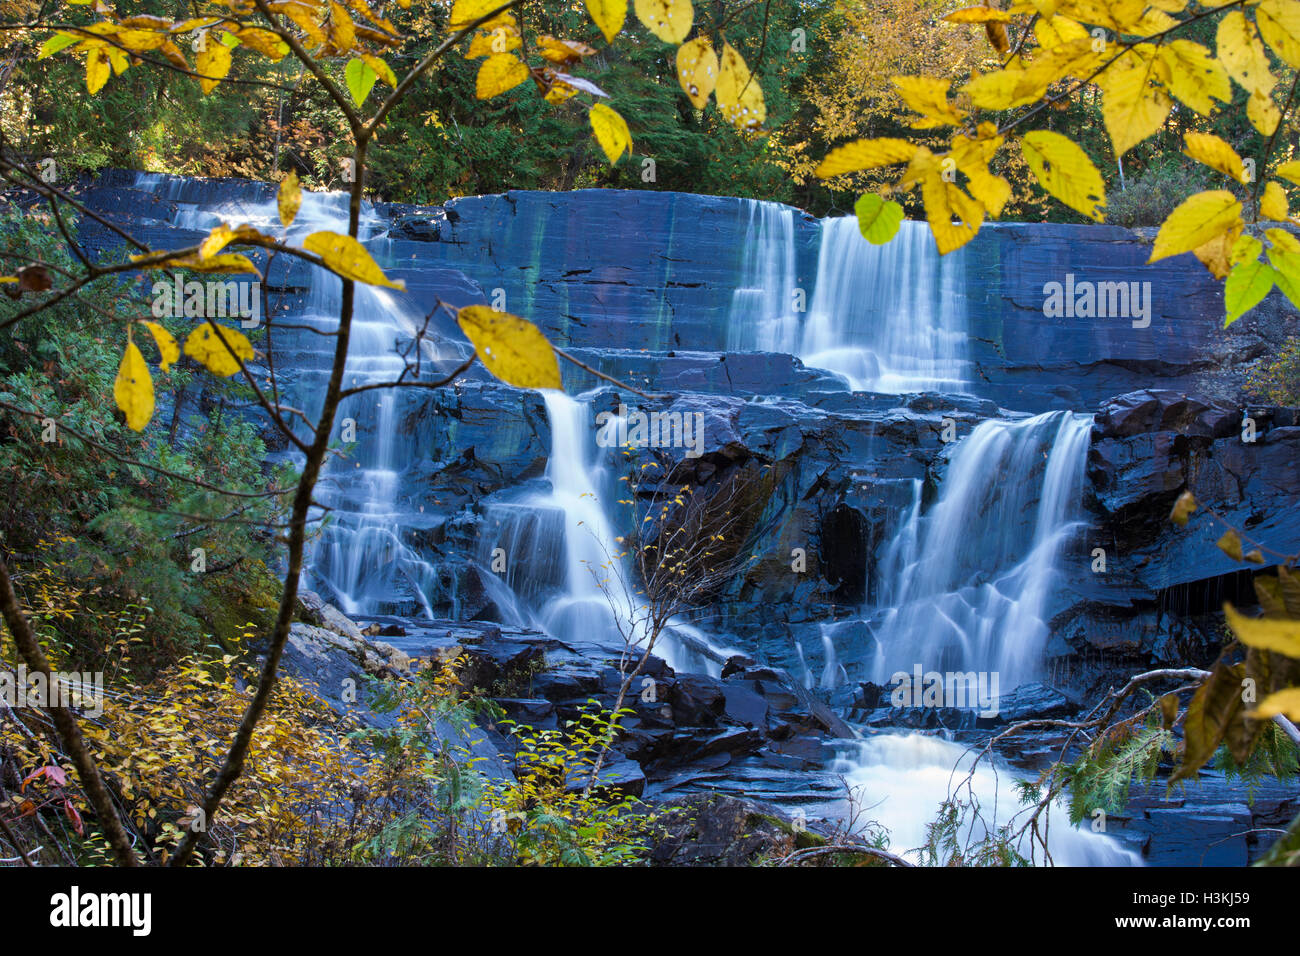 Beautiful and peaceful waterfall in autumn, Chute-aux-Rats, Mont Tremblant National Park, Canada Stock Photo